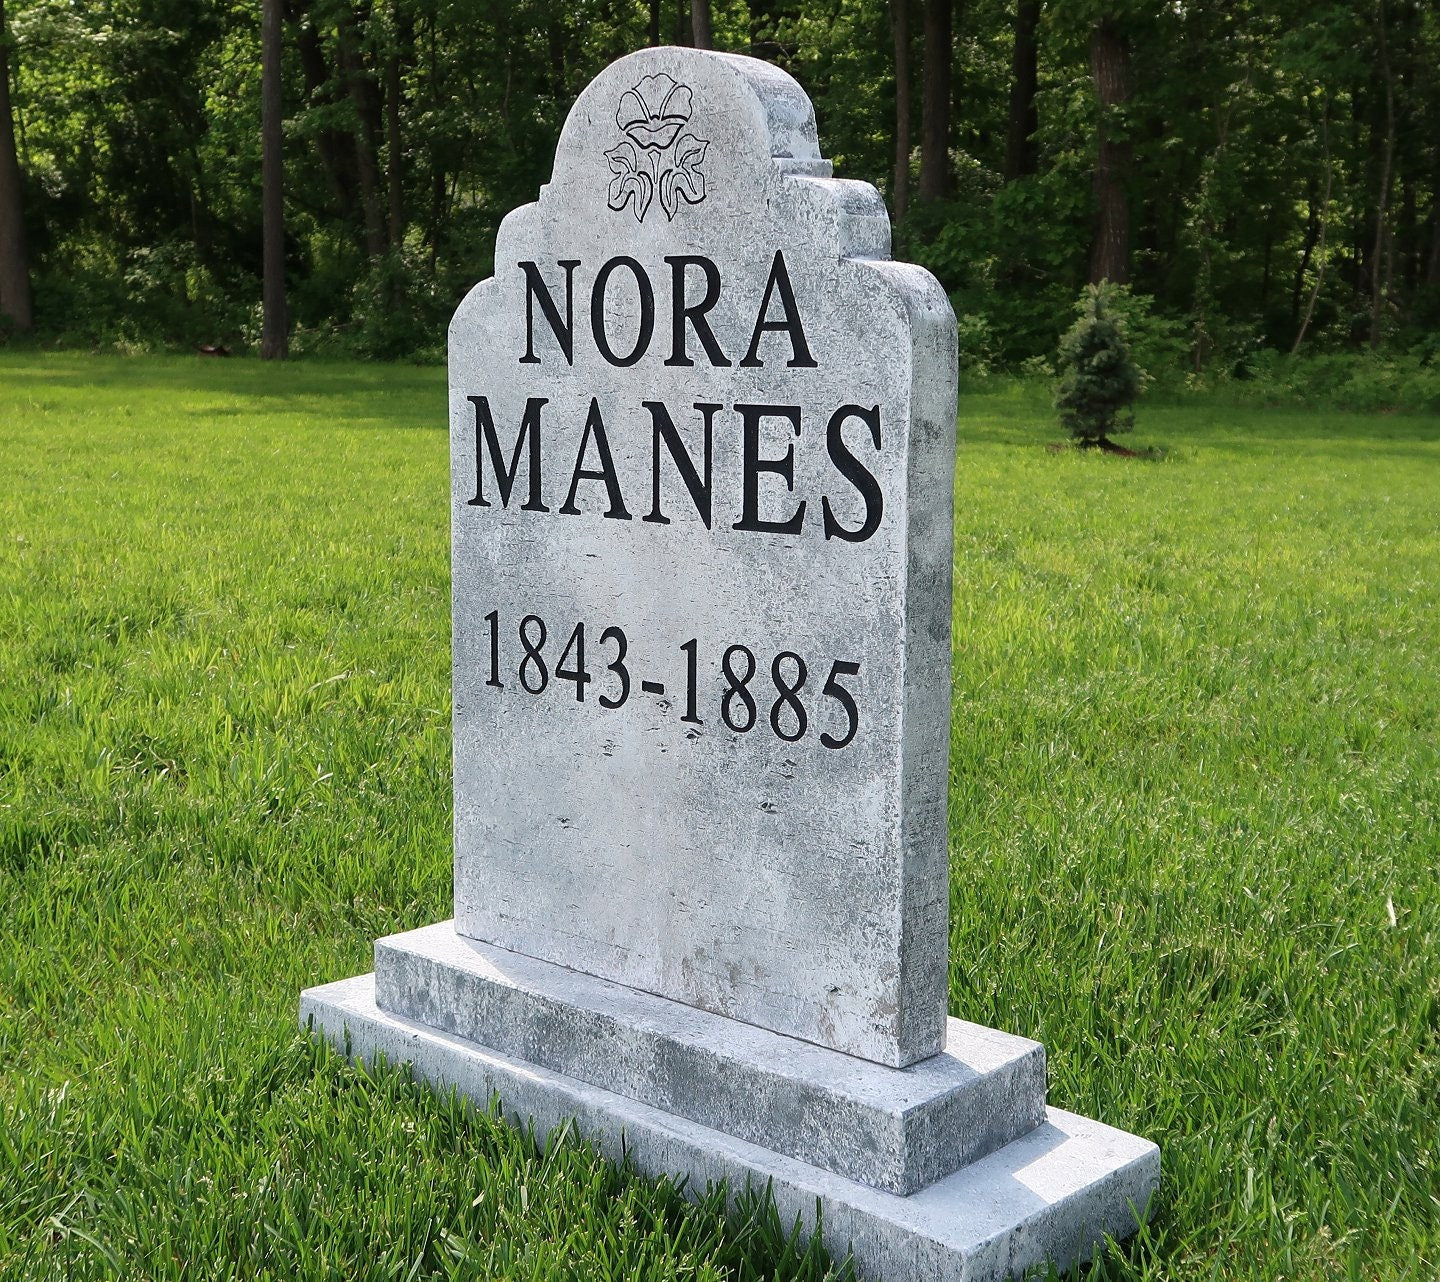 NORA MANES Silly Halloween Tombstone Yard Prop